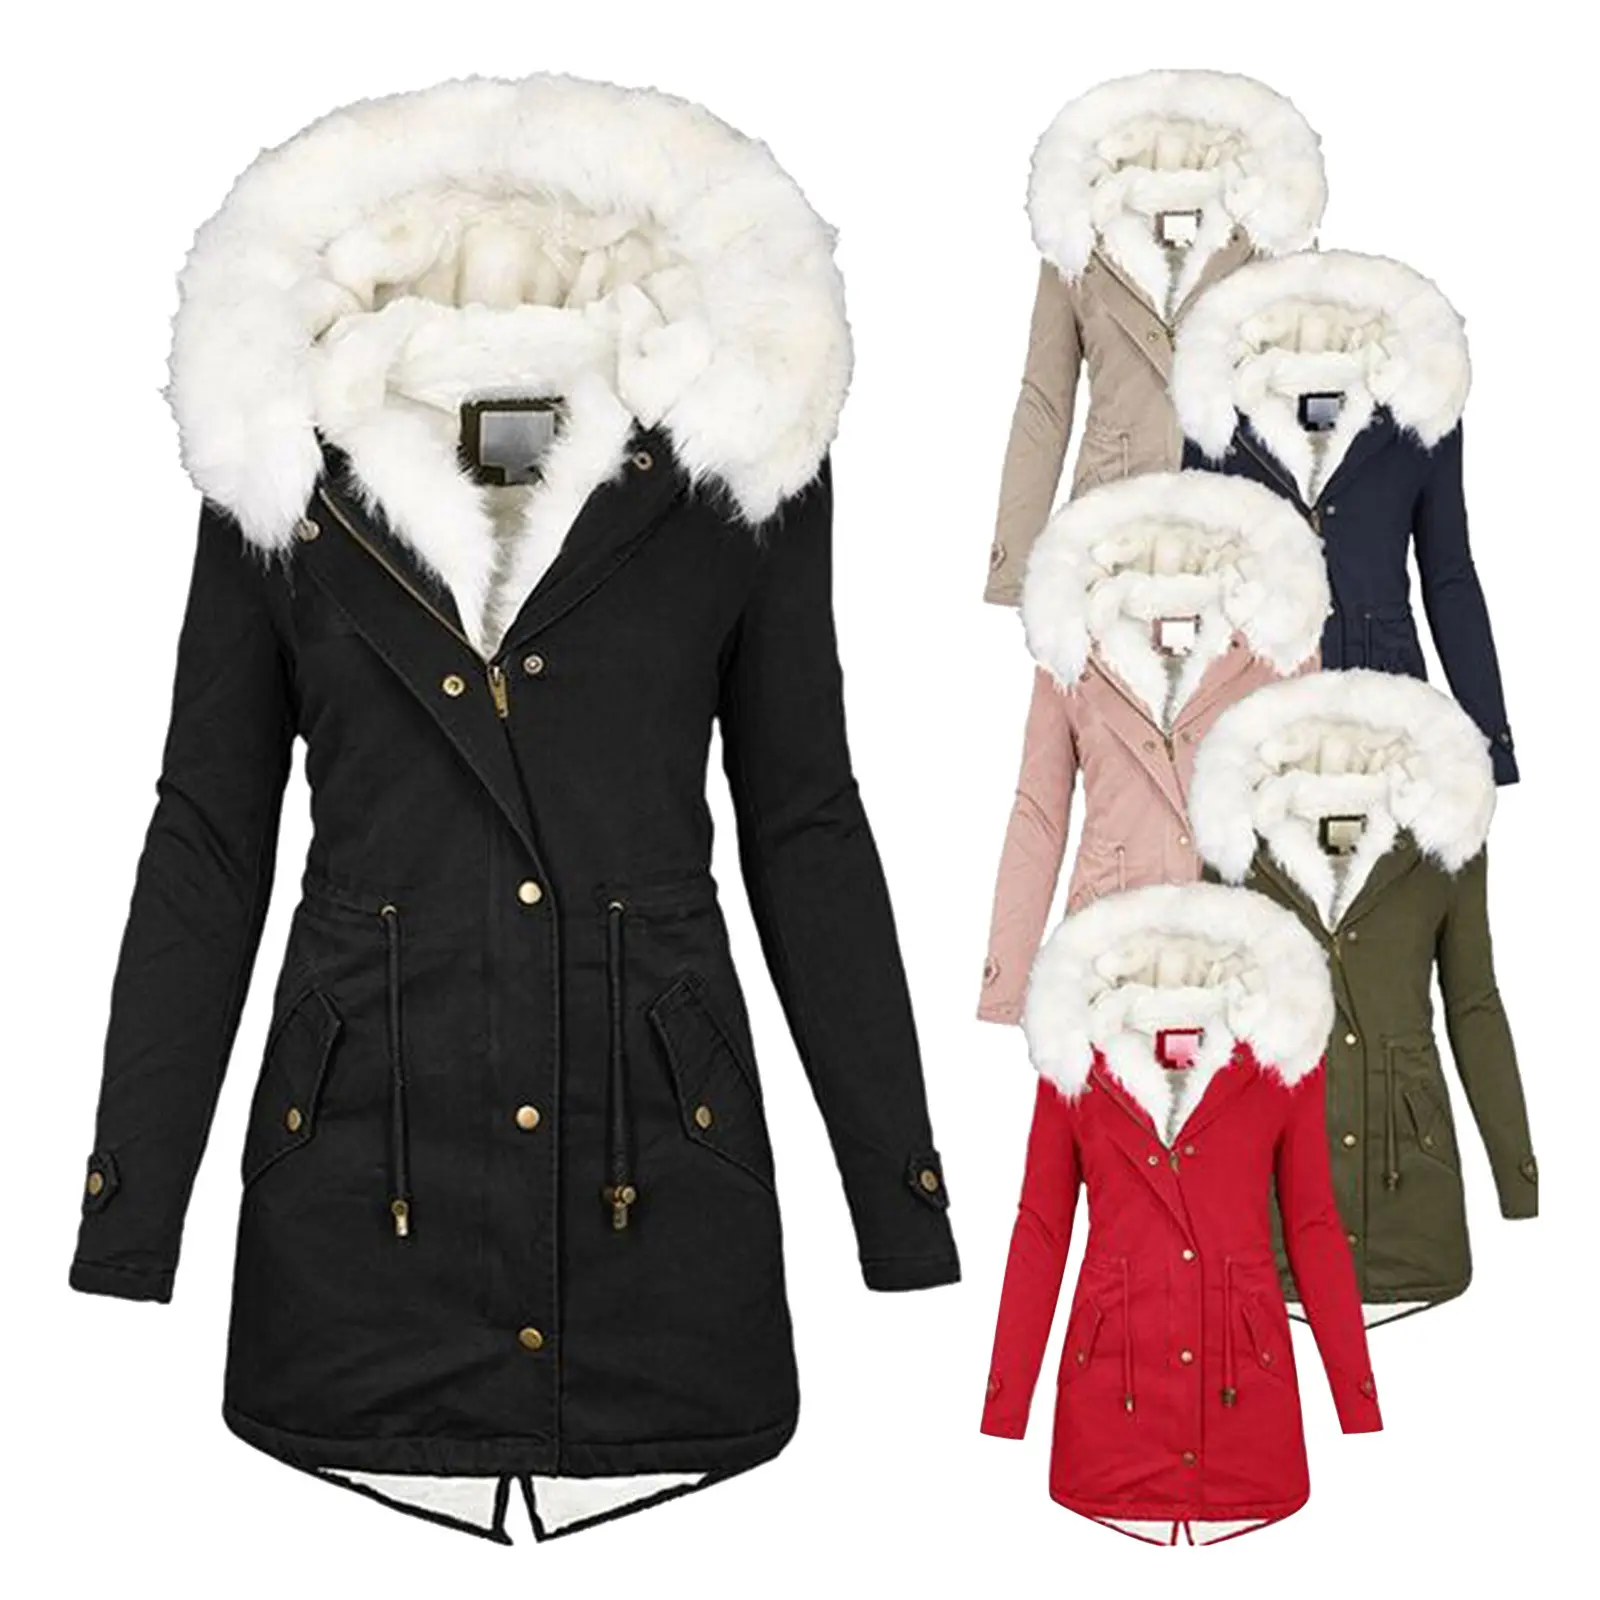 2022 New Arrivals Winter Fashion Women's Jackets Warm Down Coats Jackets Thick Padded Outerwear With Big Fur Collar